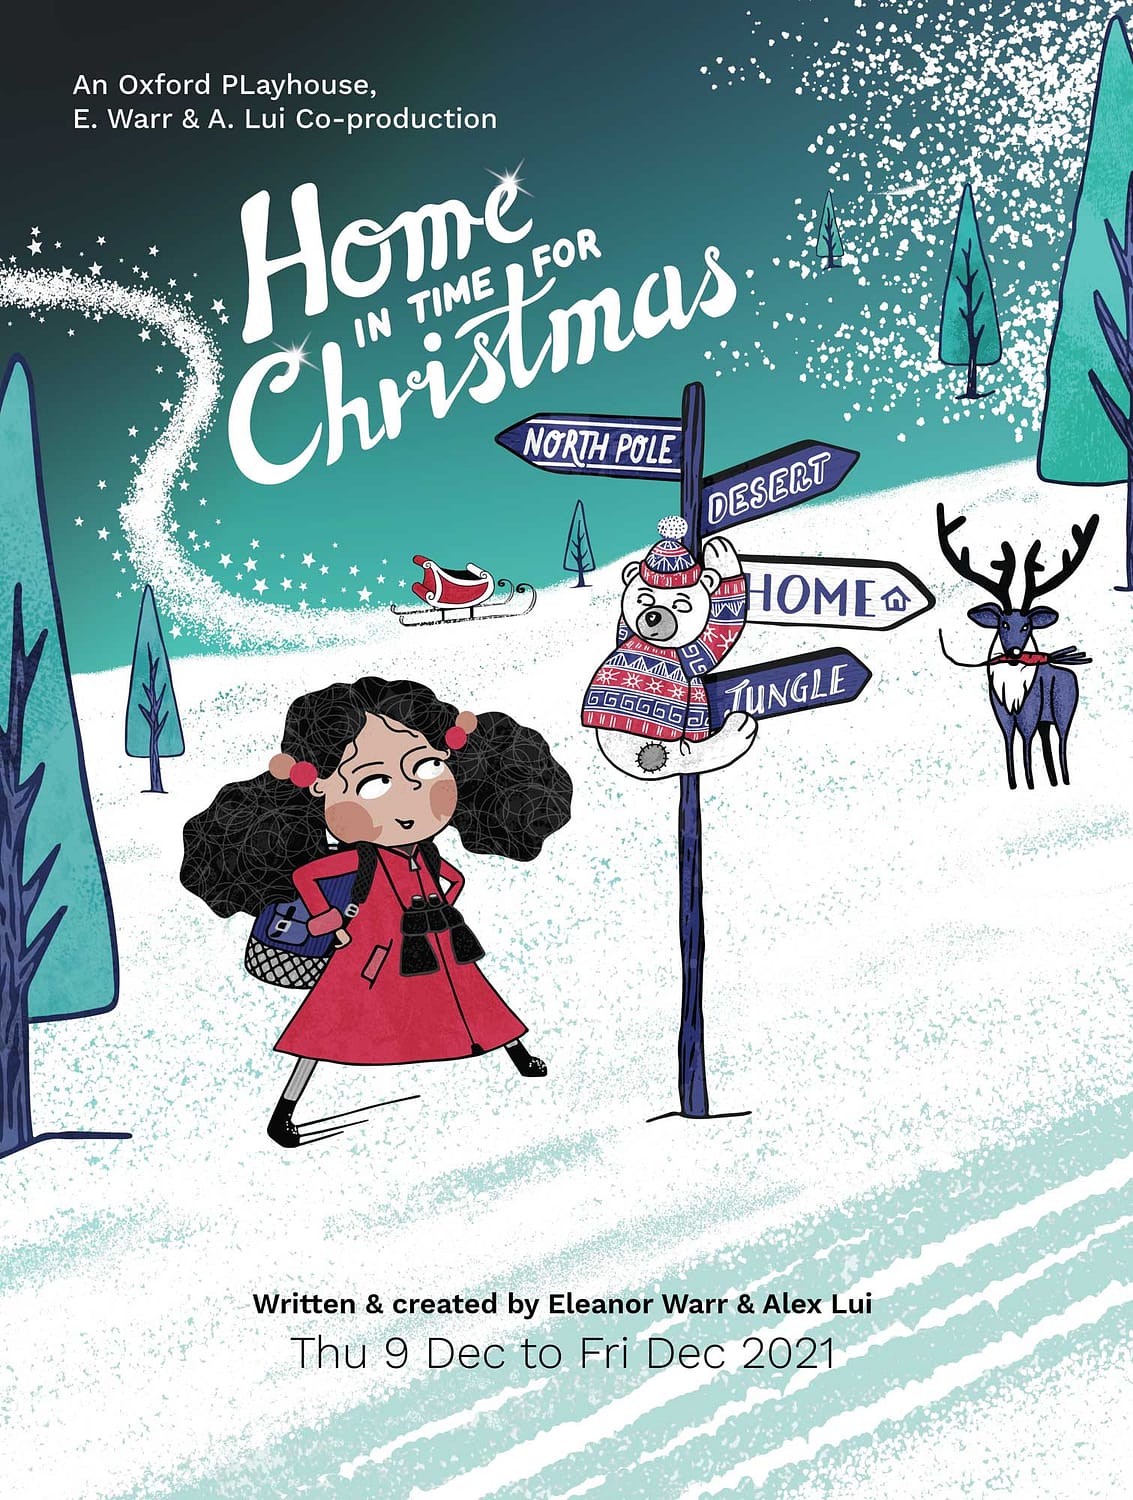 Home-in-Time-for-Christmas-for-The-Oxford-Playhouse_illustration by Kati-Lacey-Illustration